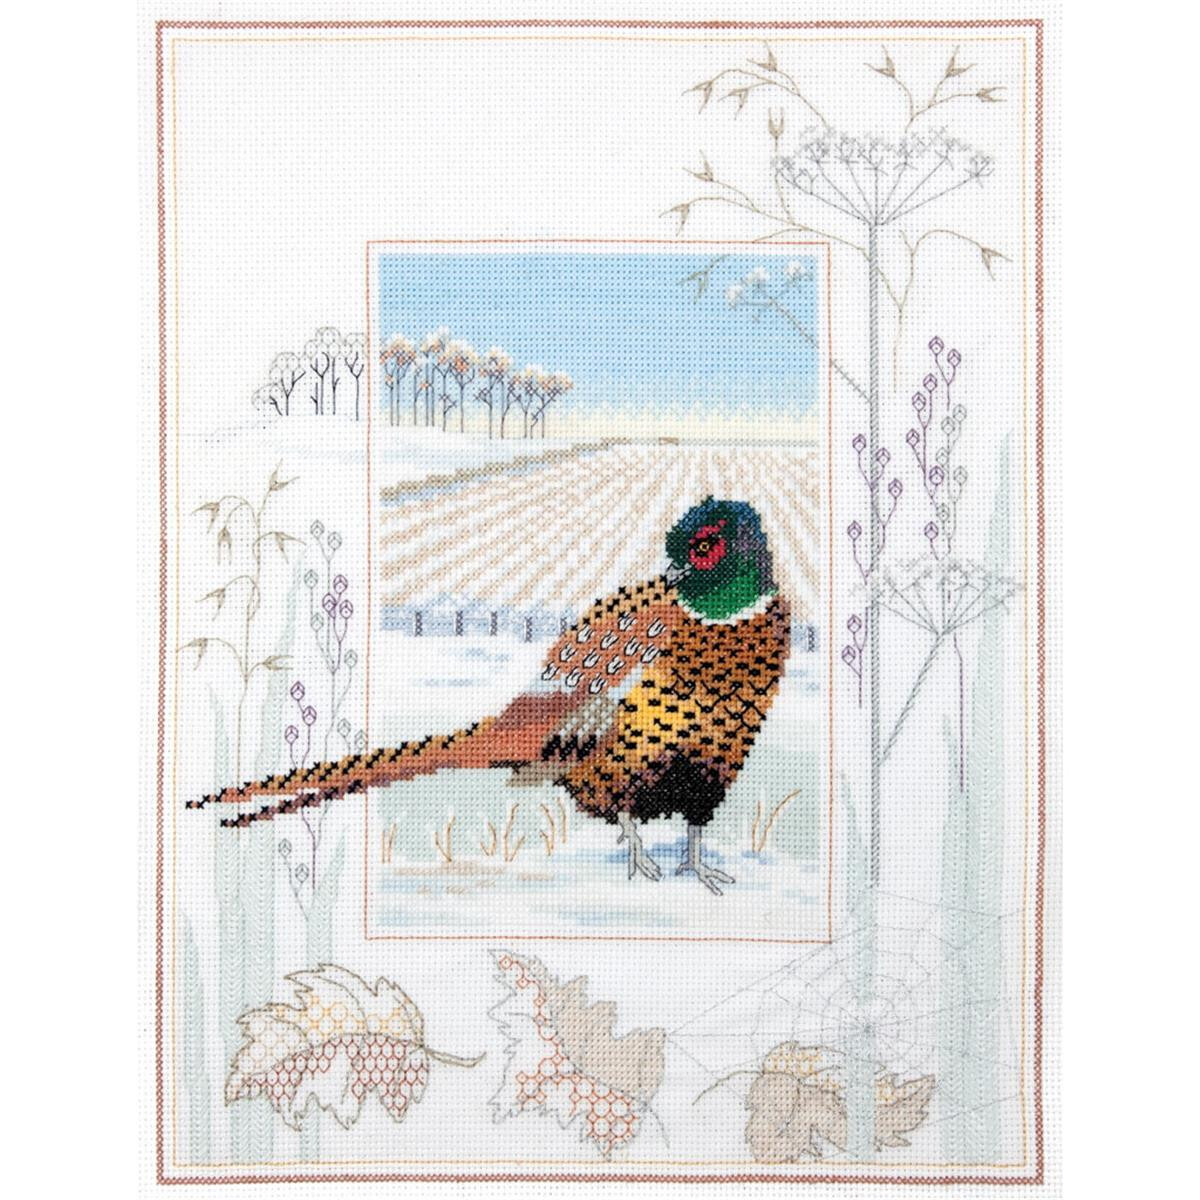 A cross-stitch artwork (embroidery picture) with a...